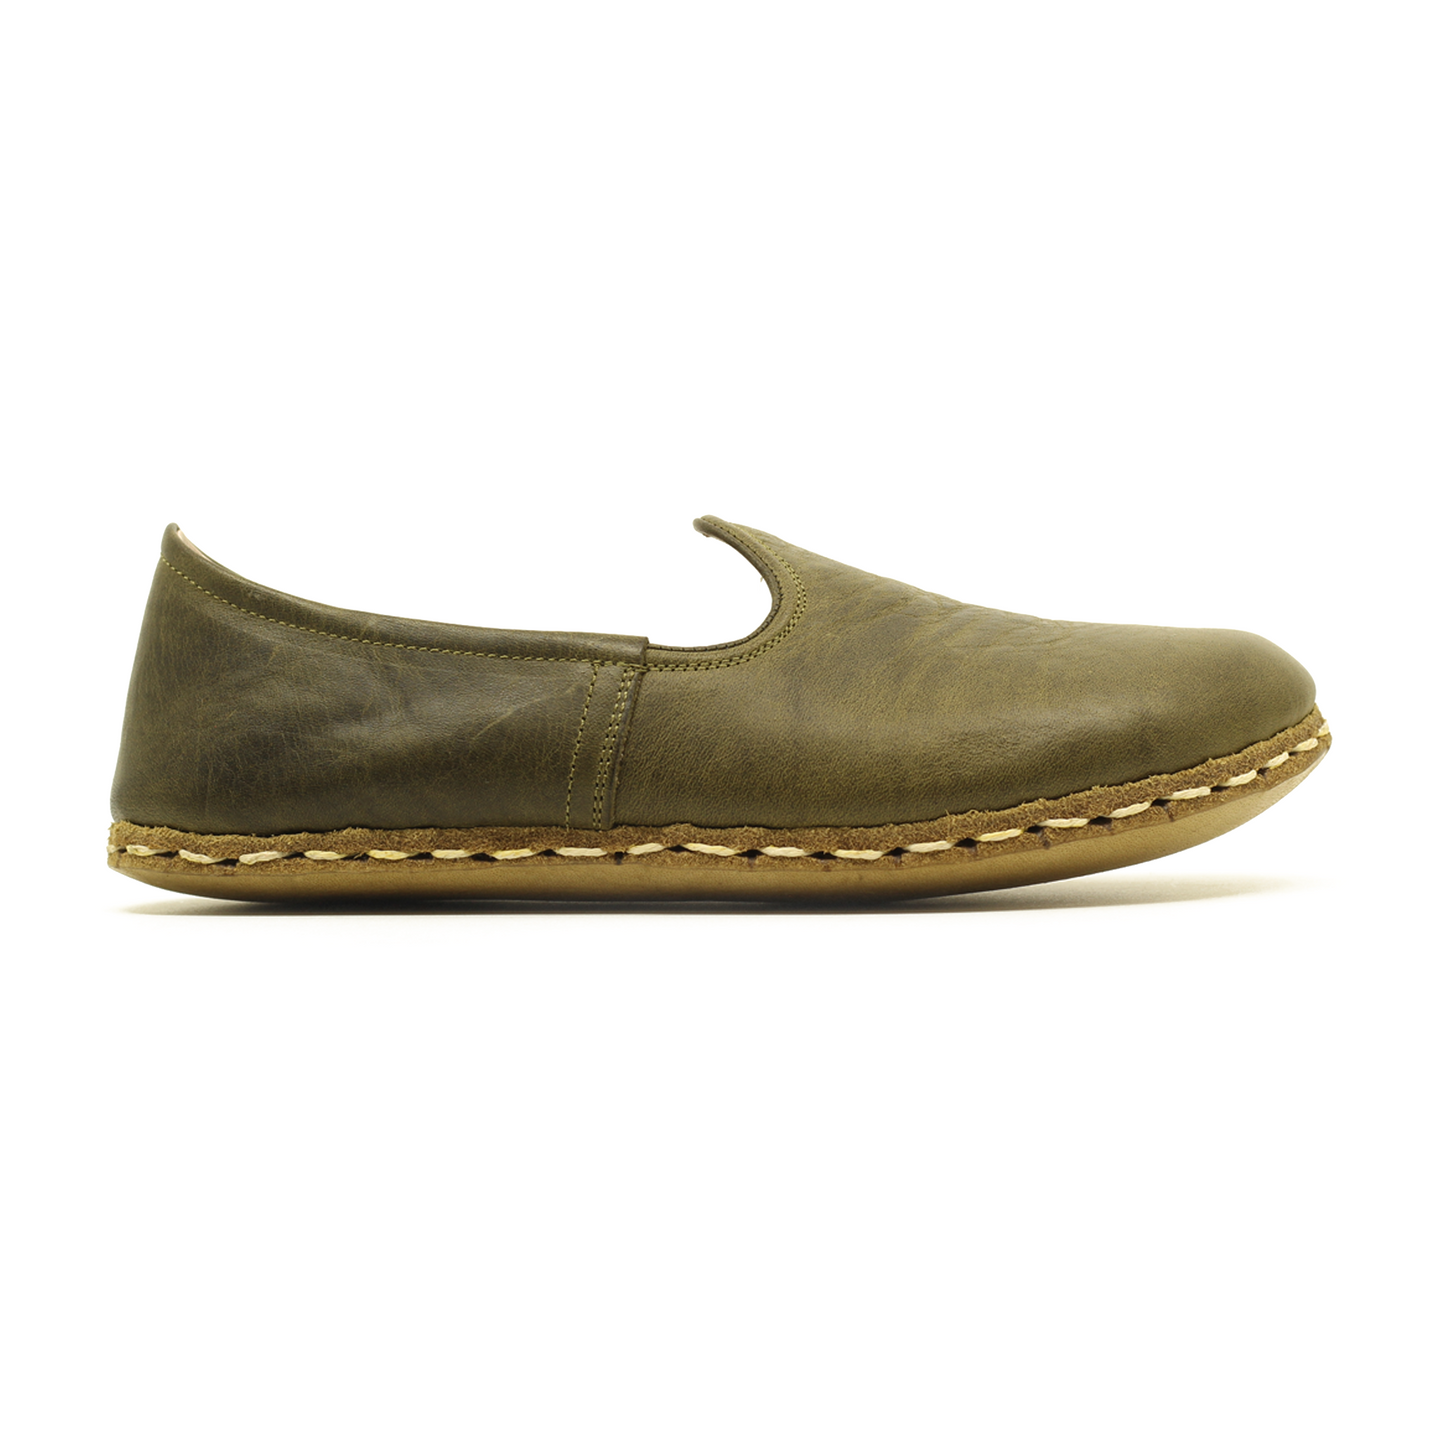 Women's Military Green Genuine Leather Shoes with Wide Front - Flexible and Healthy